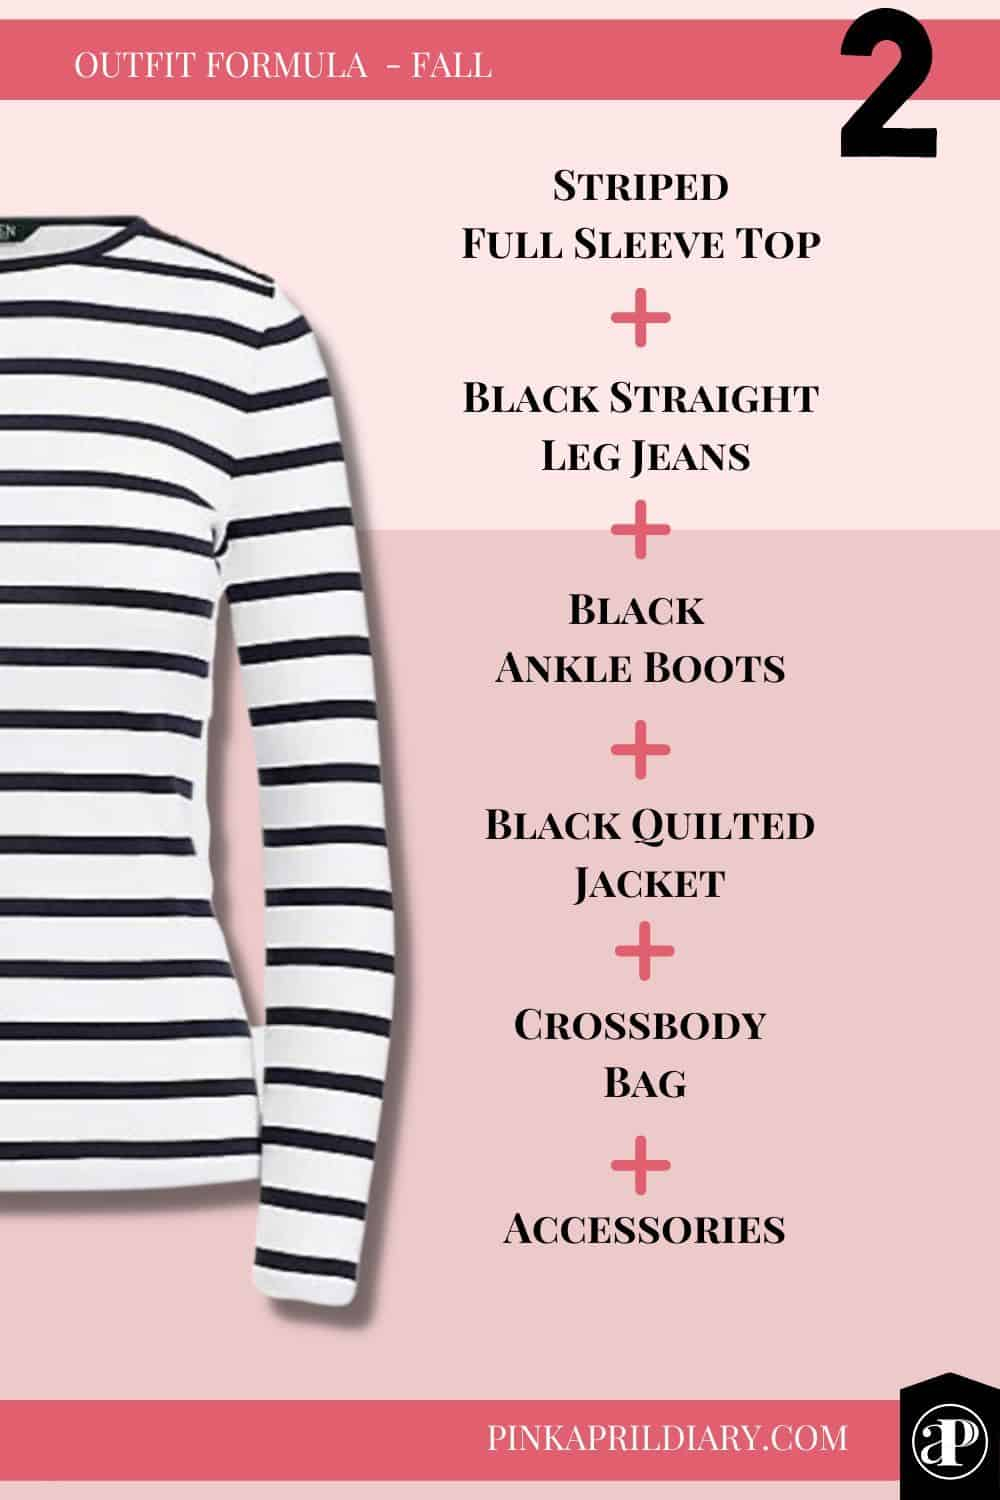 Fall Outfit Formula2 - Stripped Full Sleeve Top